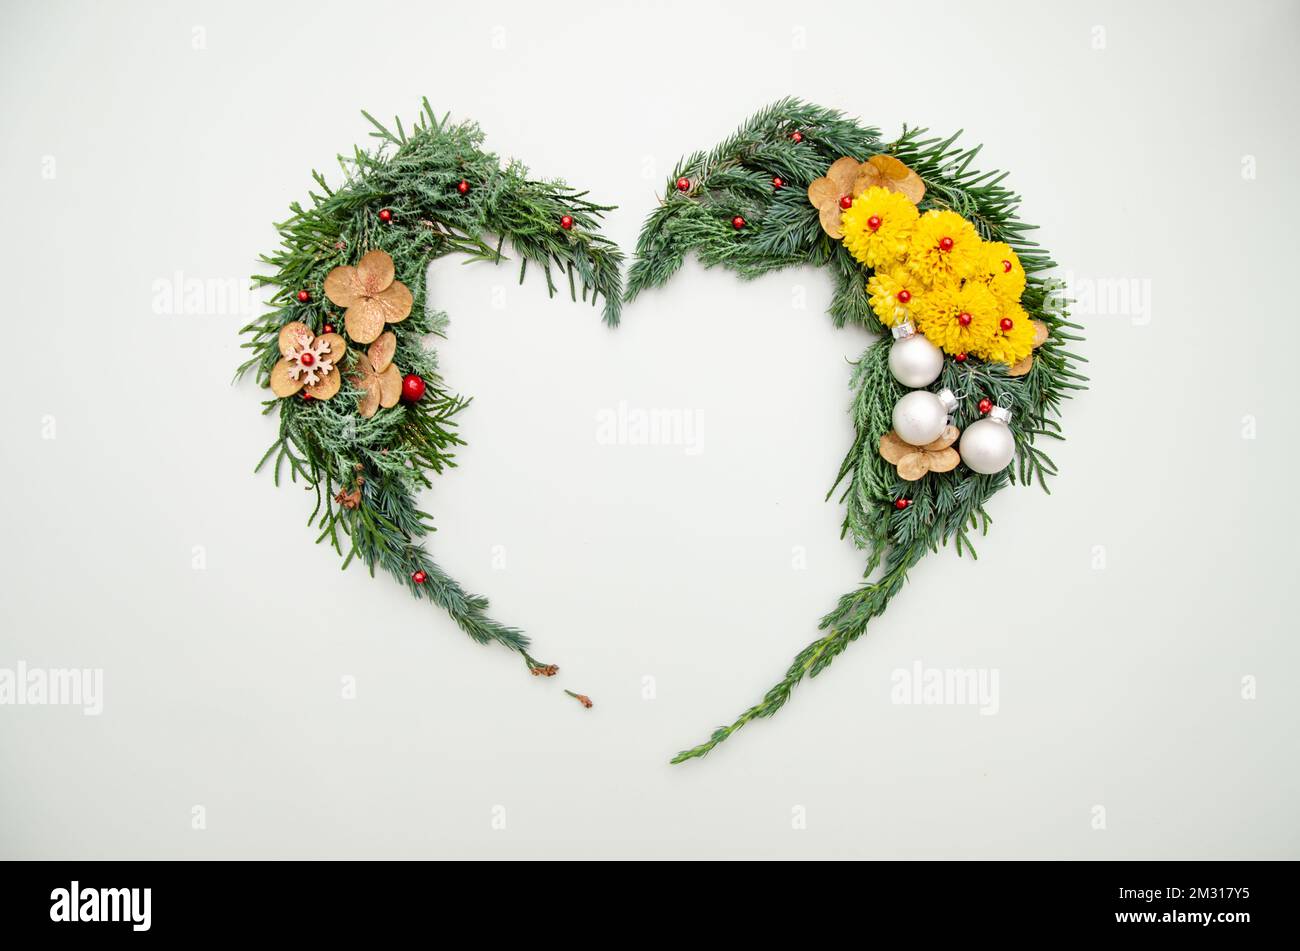 Christmas composition. Heart symbol made of pine, cypress, thuja branches branches, balls, berries and wood decorations. Christmas, winter, new year c Stock Photo